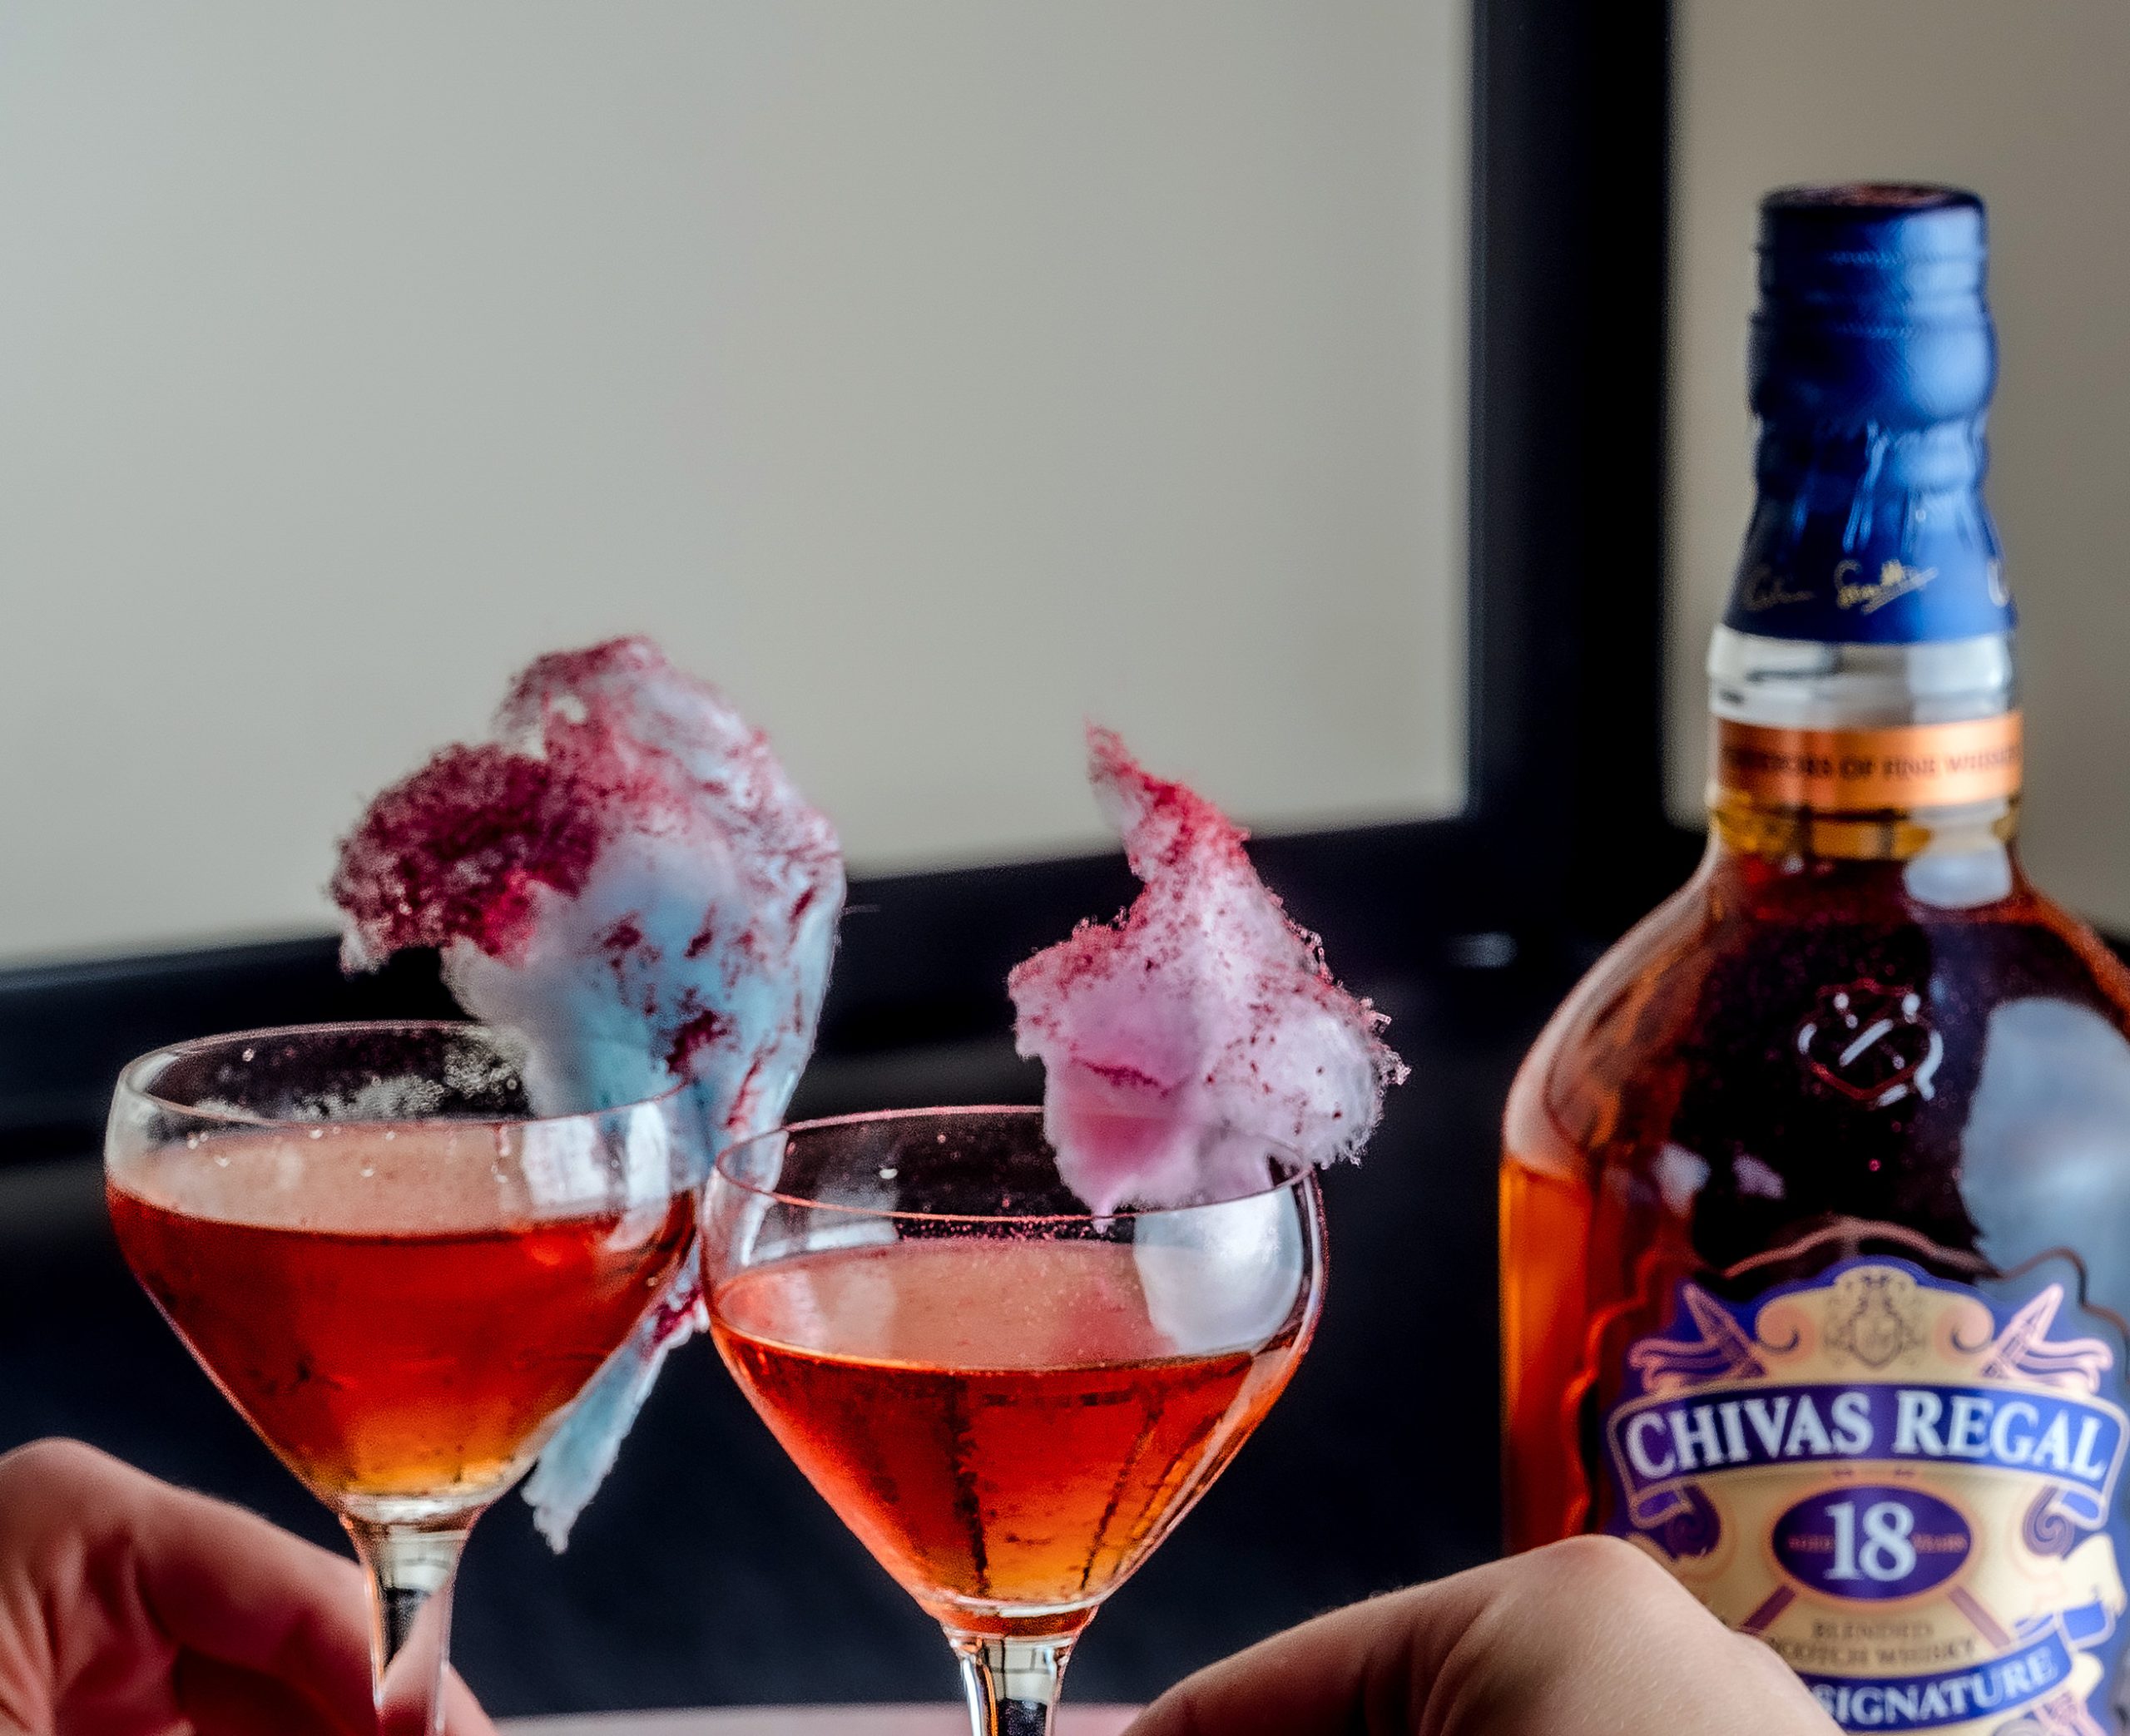 Chivas Regal 18 Whisky Cocktail RRM Candyfloss